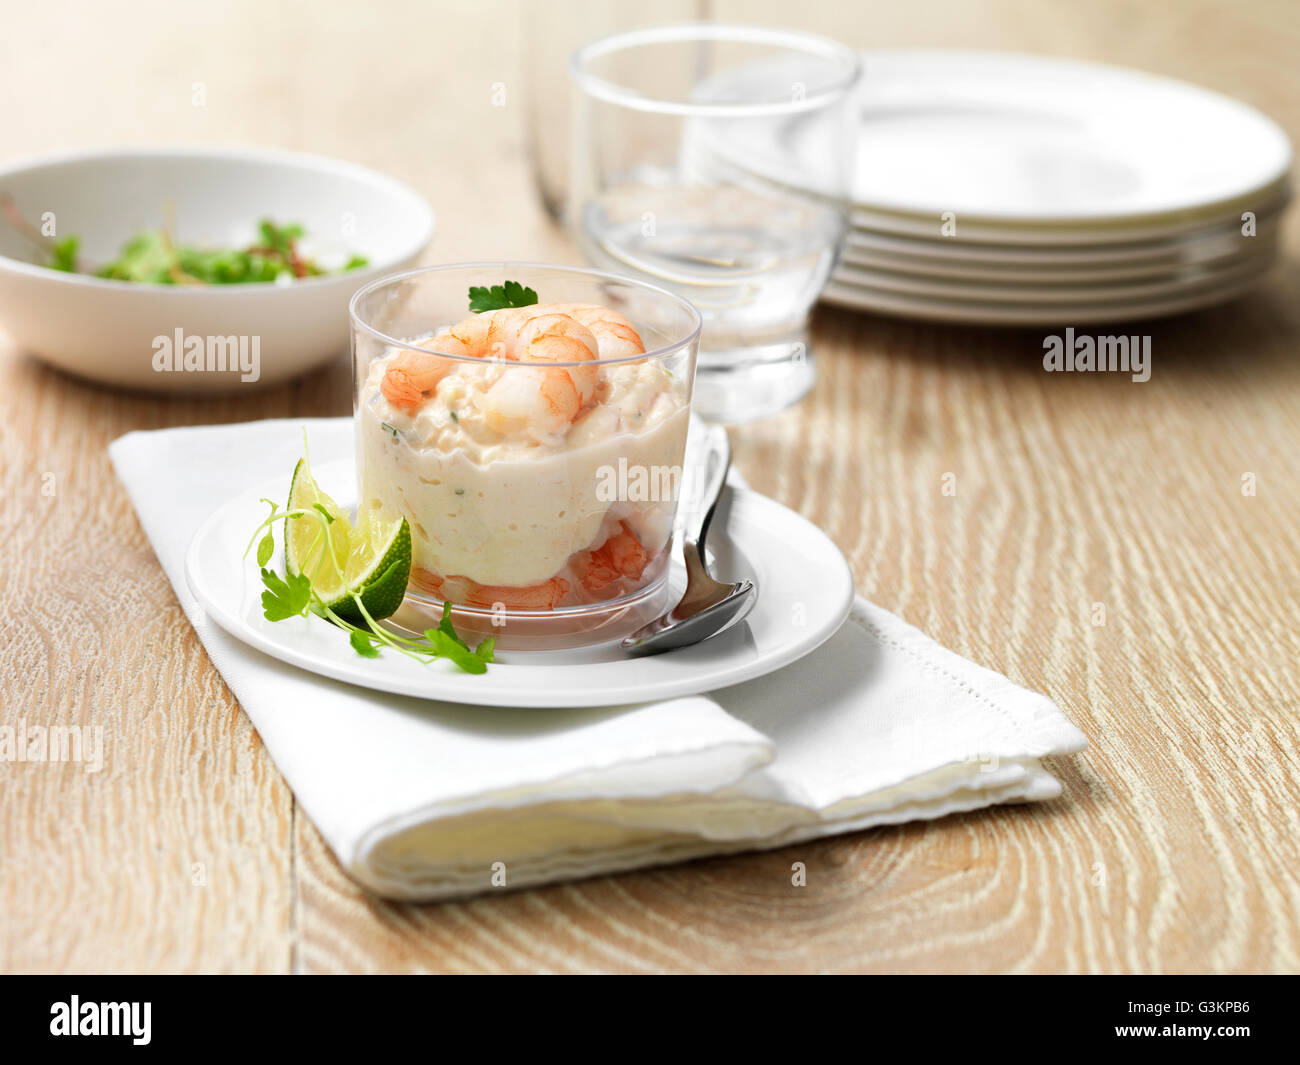 King prawn and salmon starter with lime wedge Stock Photo